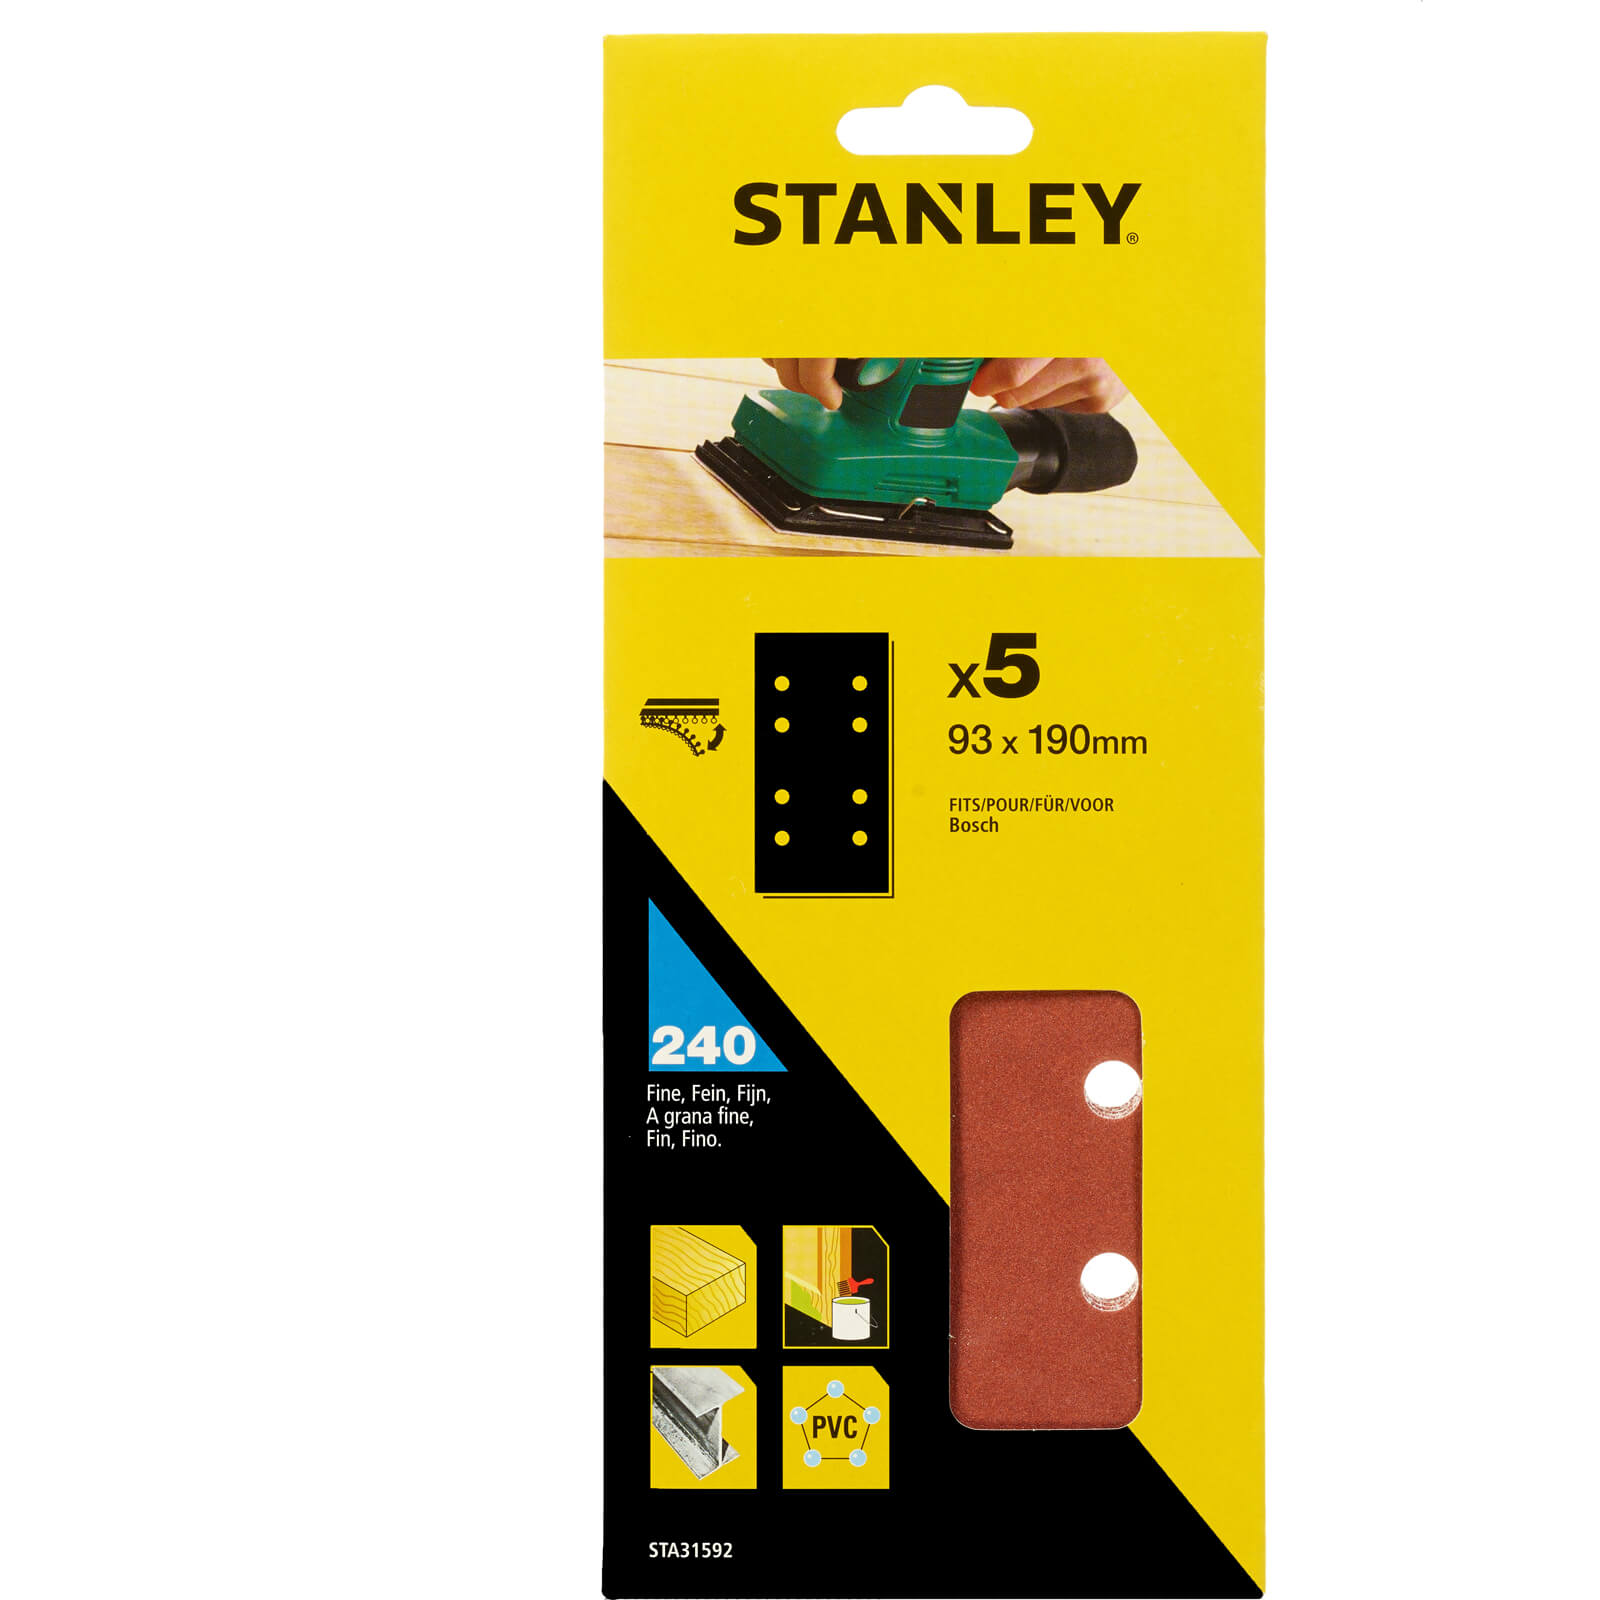 Photos - Abrasive Wheel / Belt Stanley Punched Hook and Loop 1/3 Sanding Sheets 93mm x 190mm 240g Pack of 